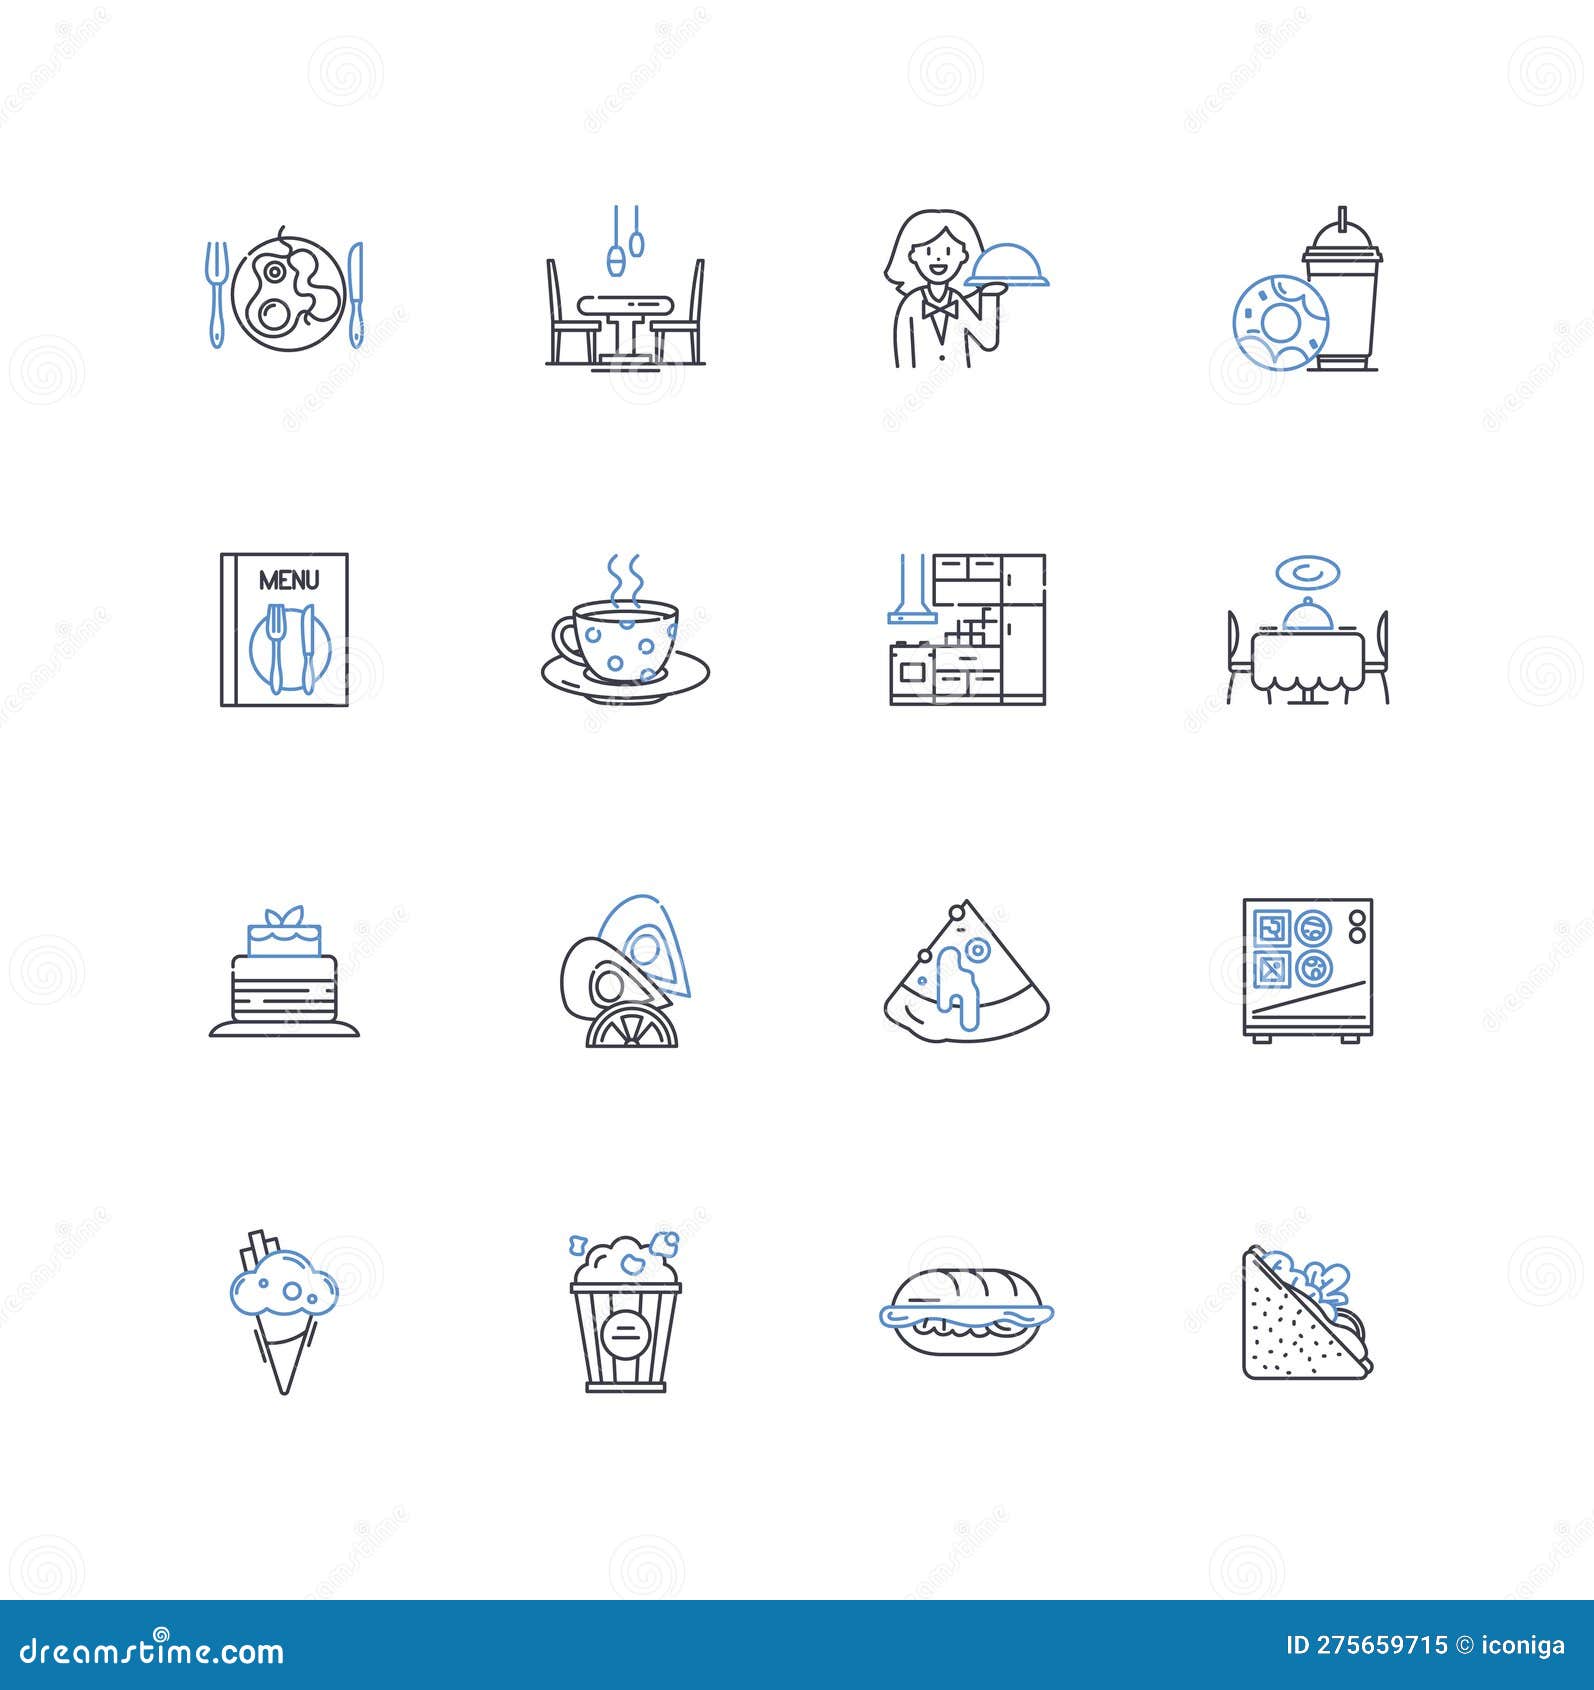 culinary outlet line icons collection. gourmet, cuisine, dining, restaurant, bistro, diner, brasserie  and linear